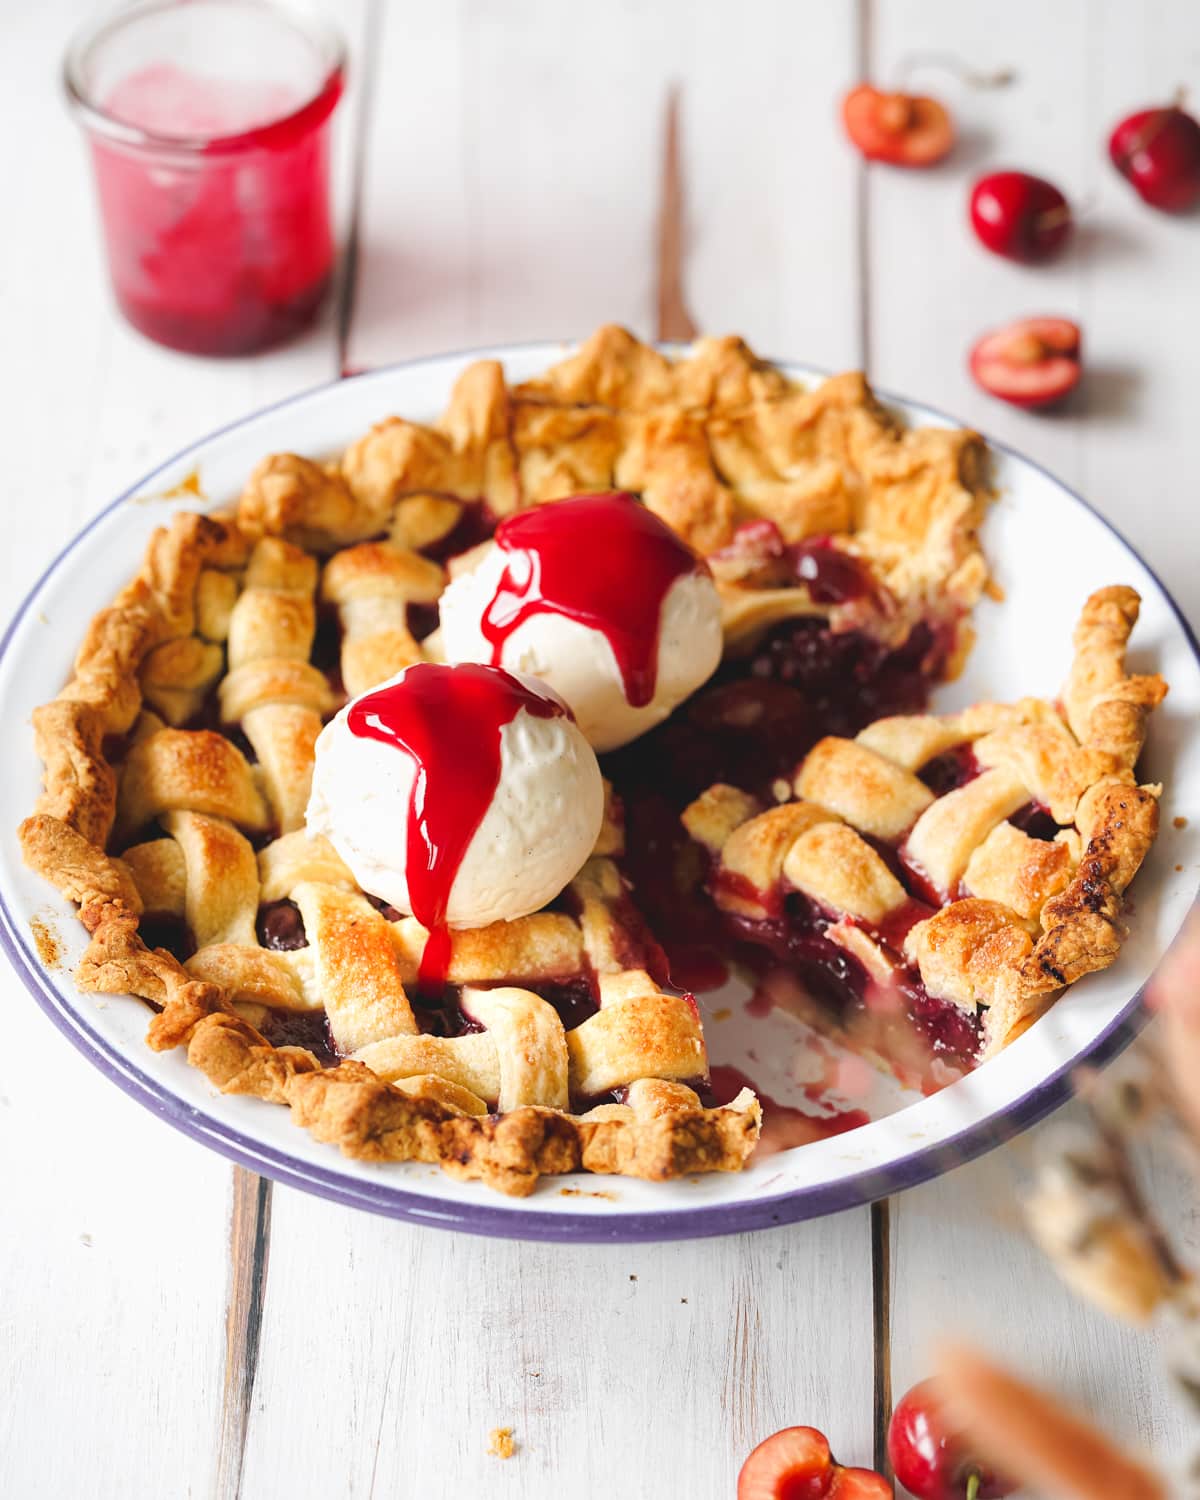 vegan cherry pie with vanilla ice cream and cherry sauce on a white wooden surface.